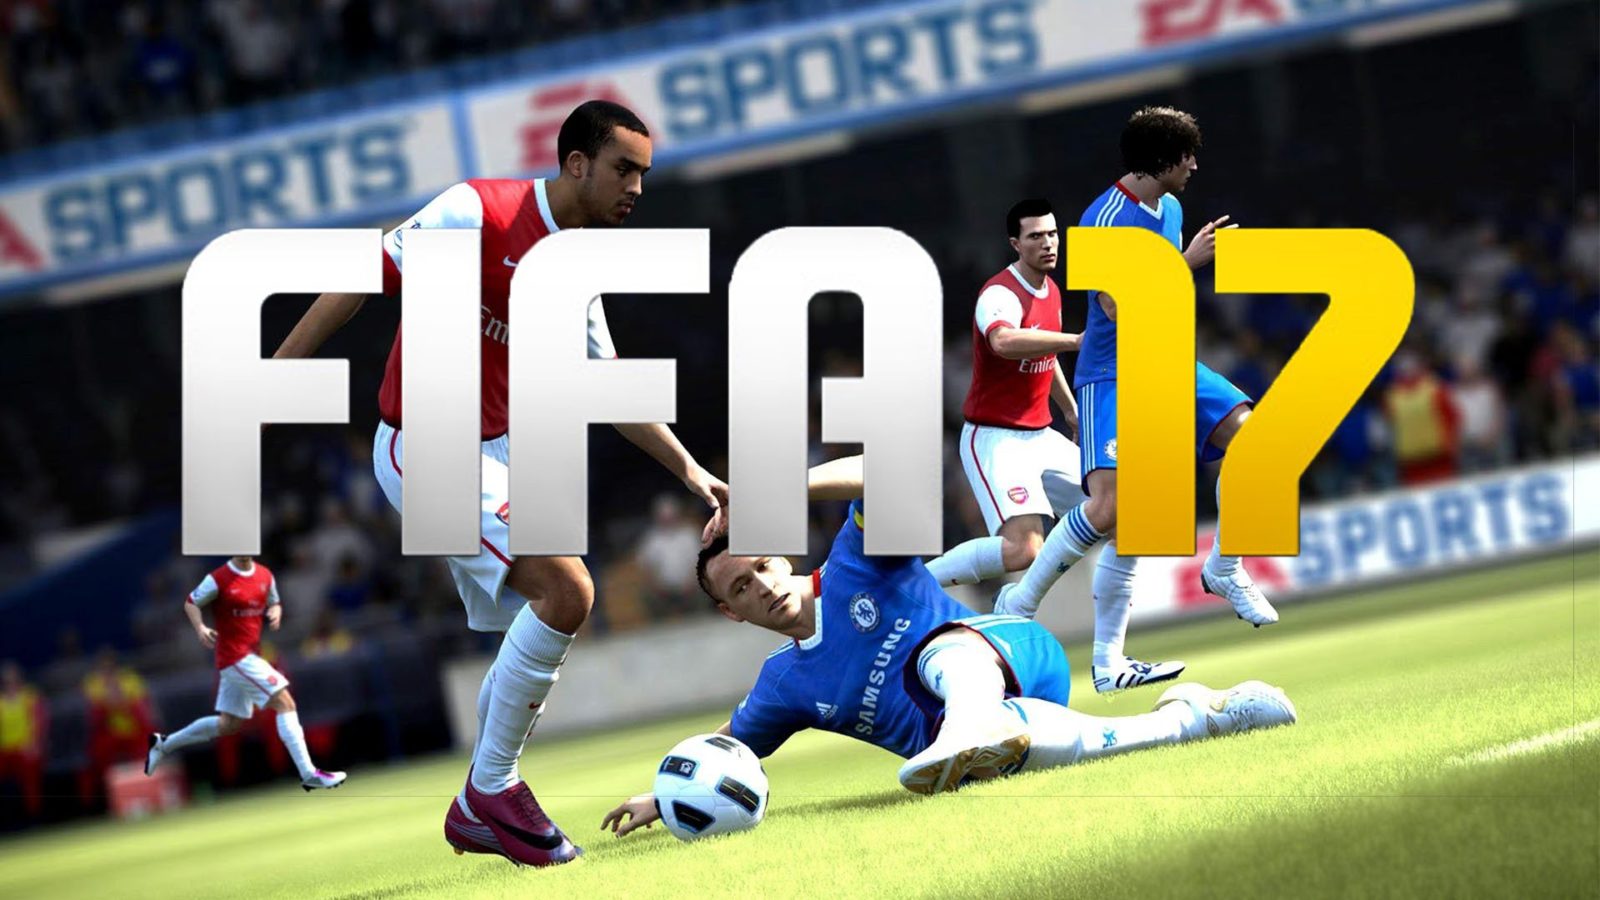 Excellent Fifa Wallpaper Full HD Pictures